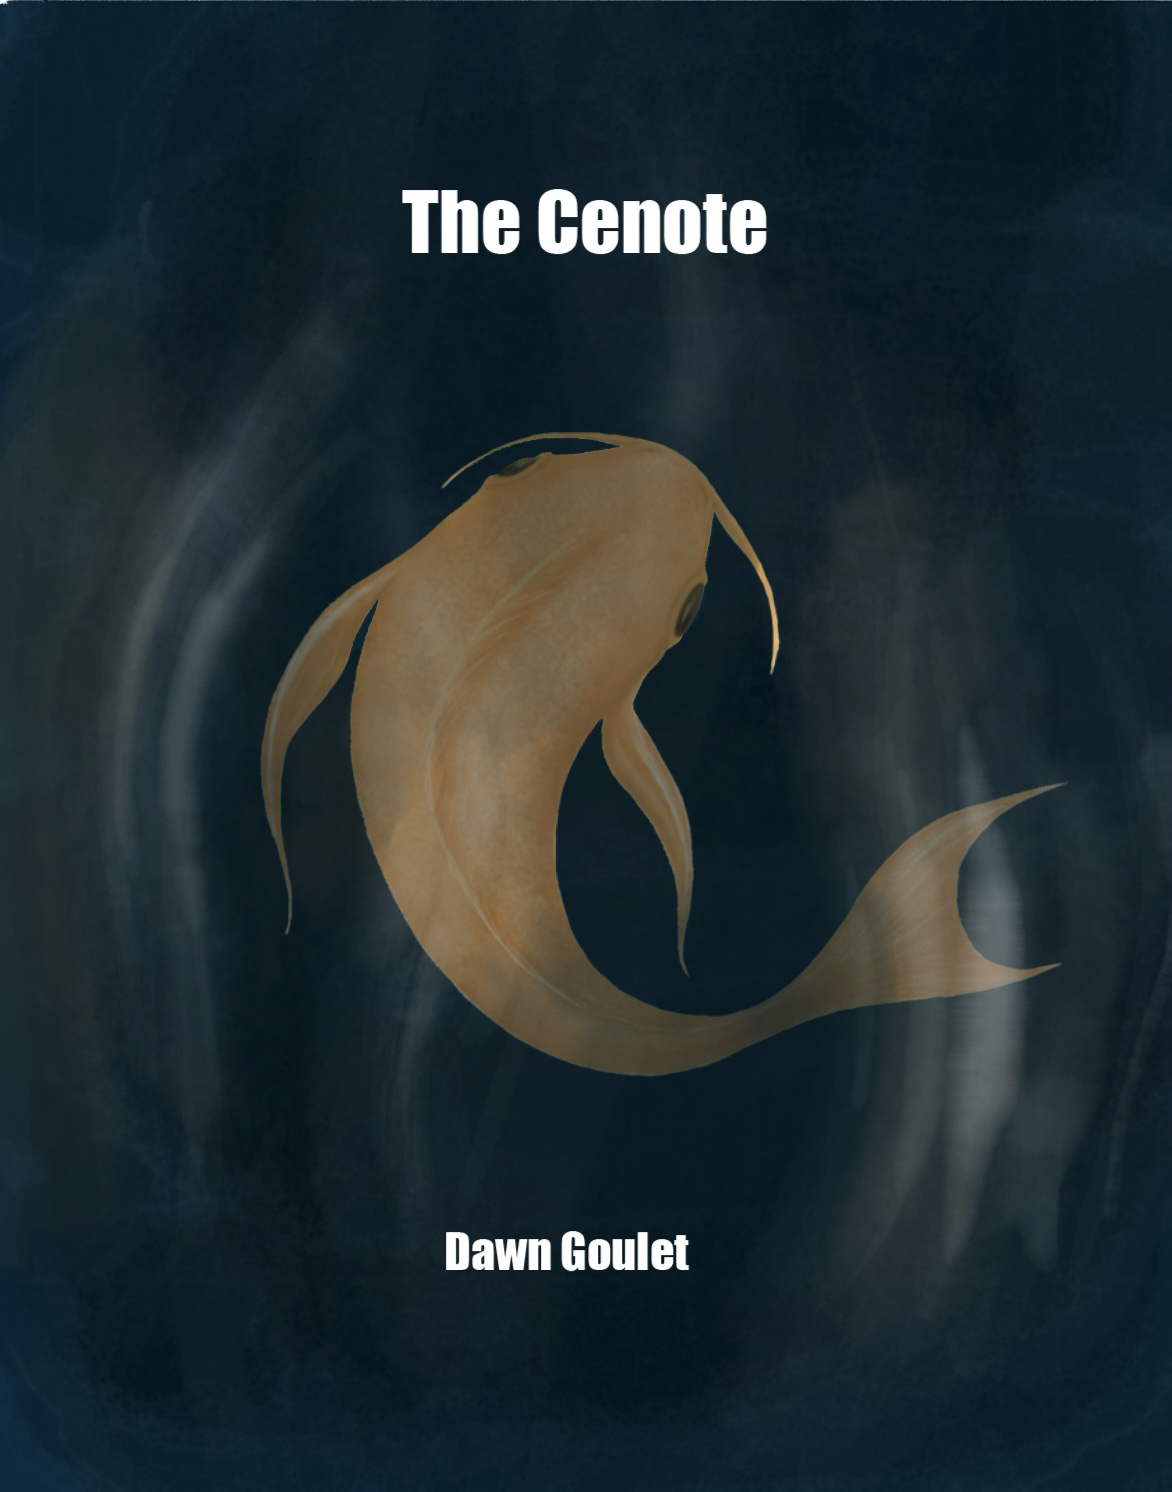 The Cenote by Dawn Goulet